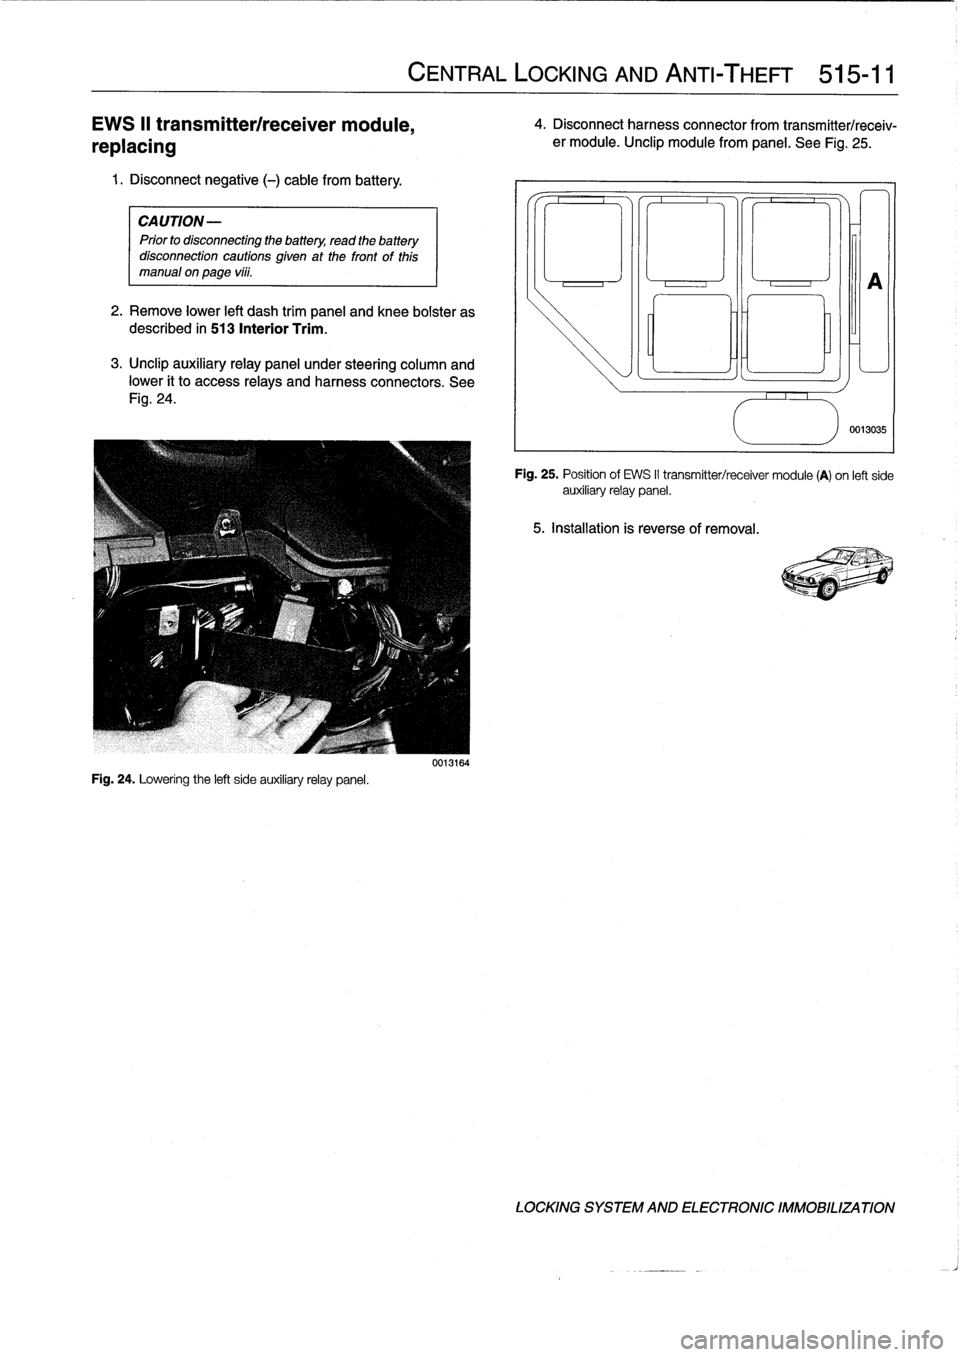 BMW 328i 1998 E36 Workshop Manual 
EWS
II
transmitterlreceiver
module,

replacing

1
.
Disconnect
negative
(-)
cable
from
battery
.

CAUTION-

Prior
to
disconnectiog
the
battery,
read
the
battery
disconnection
cautions
given
at
the
fr